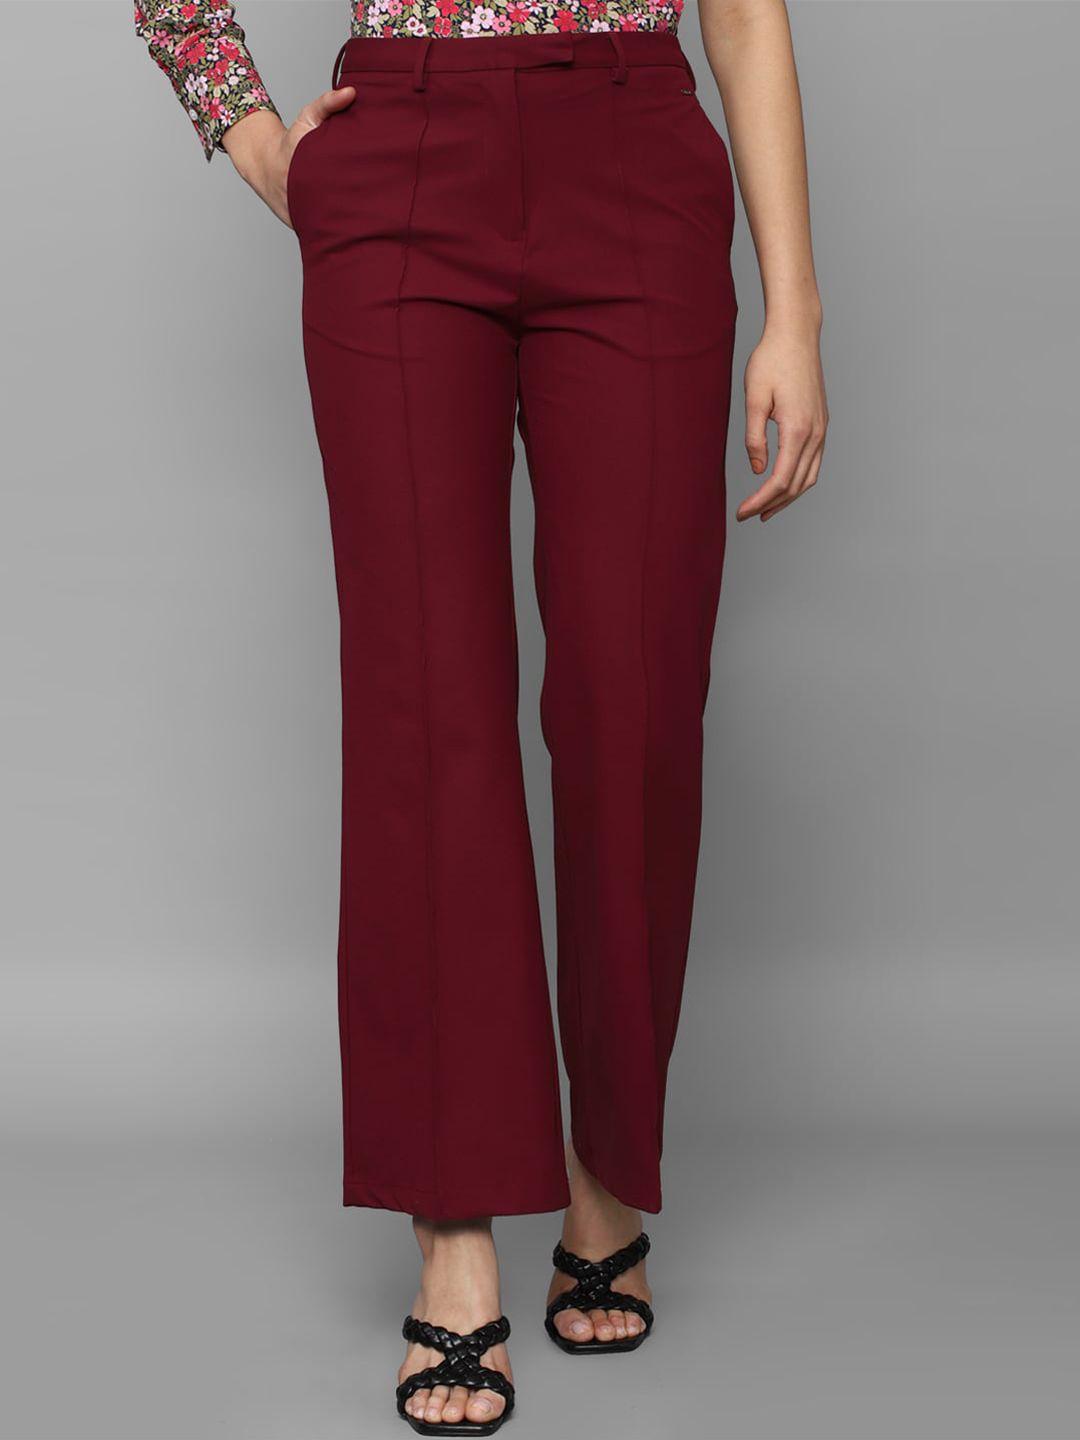 allen solly woman flared fit trousers